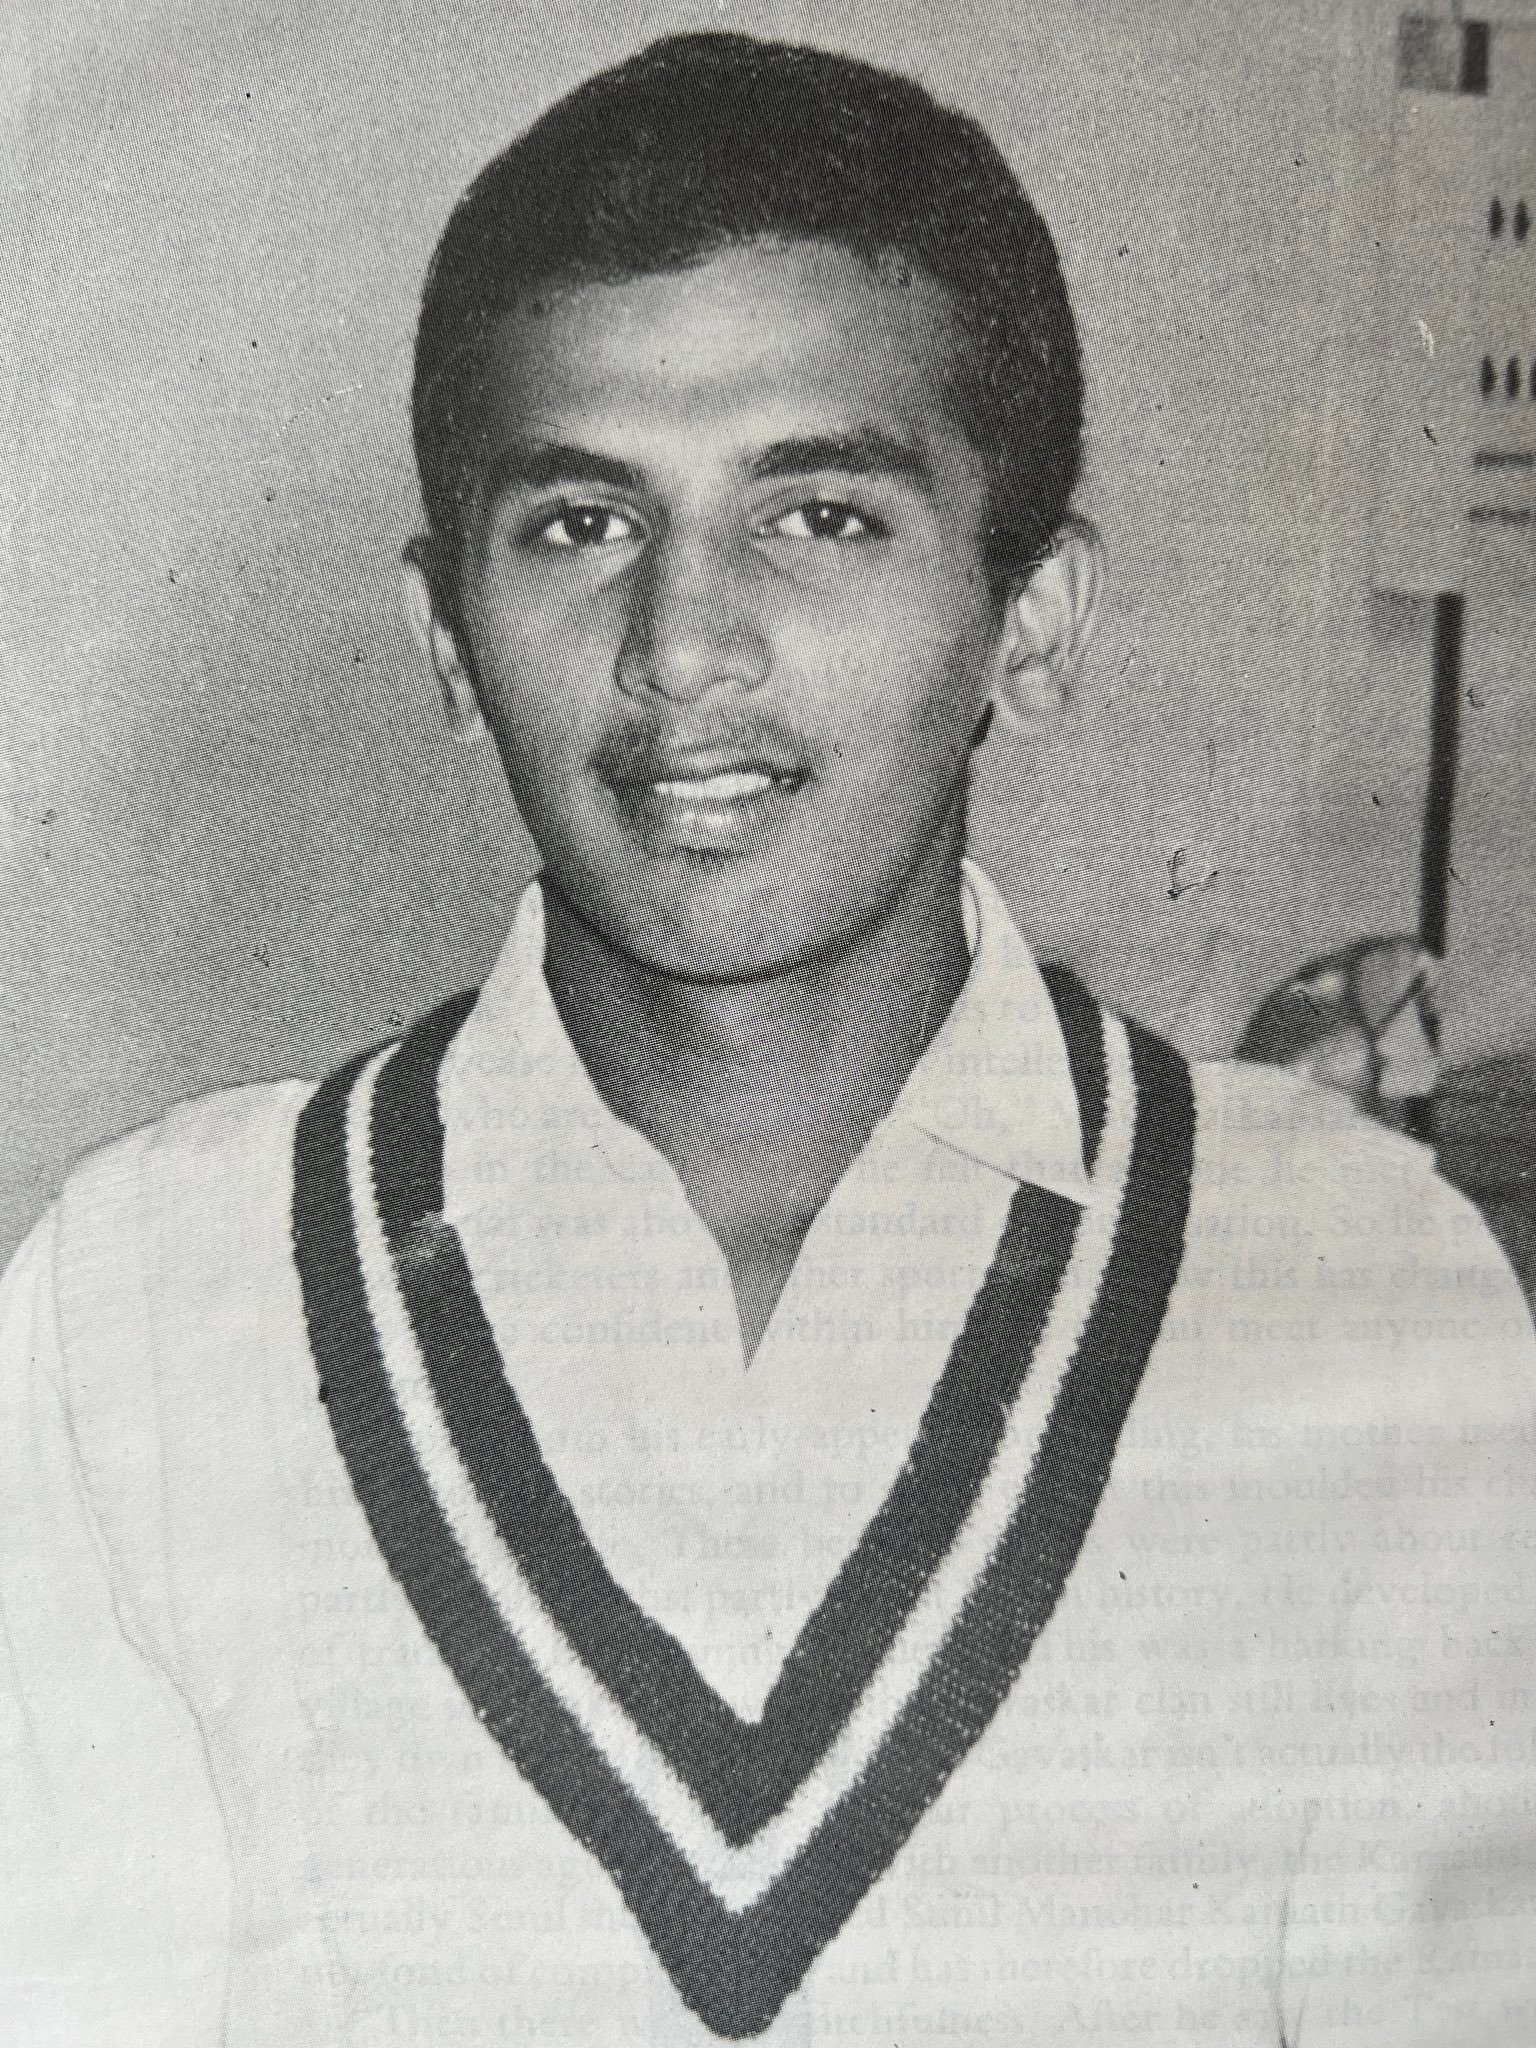 Sunil Gavaskar who at 21 became the first Indian to score over 700 runs in a Test series and the first ever Test Cricketer to score over 700 runs in his debut Test series.